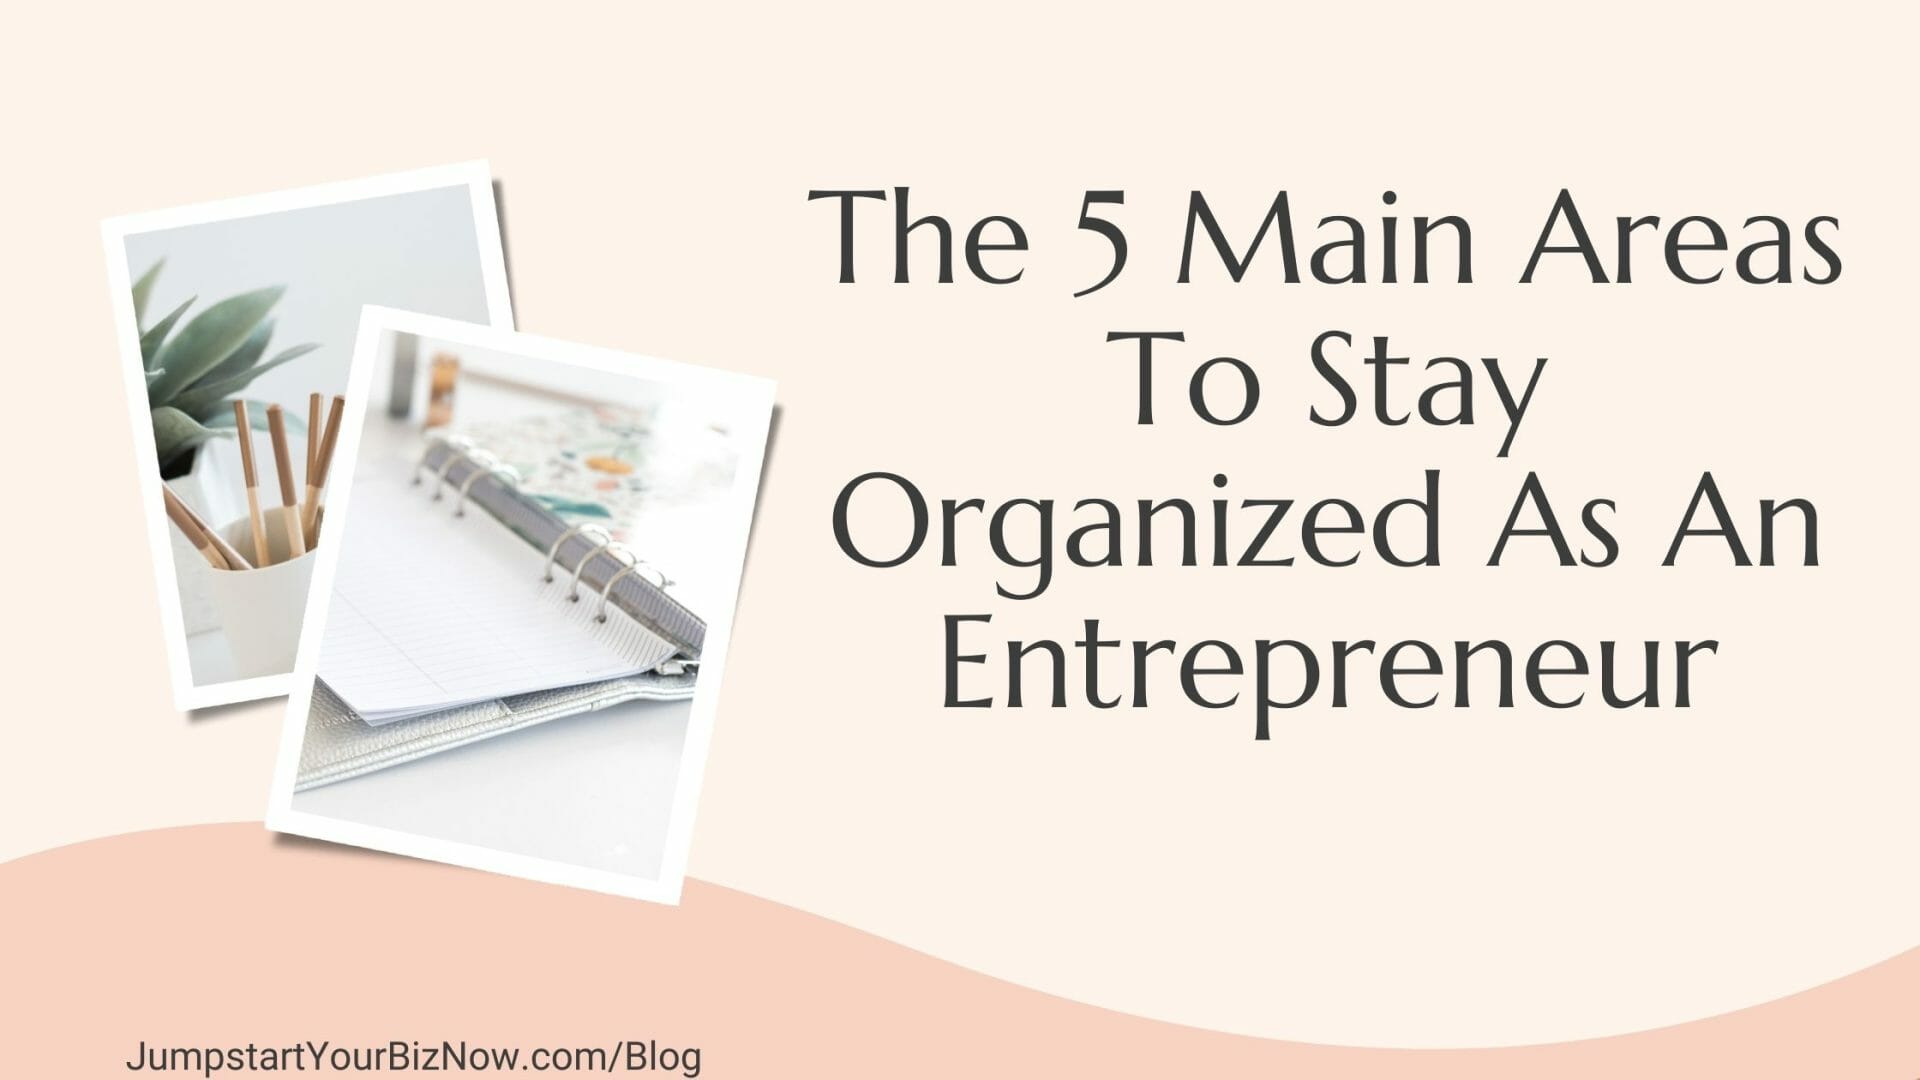 5 Main Areas to Stay Organized